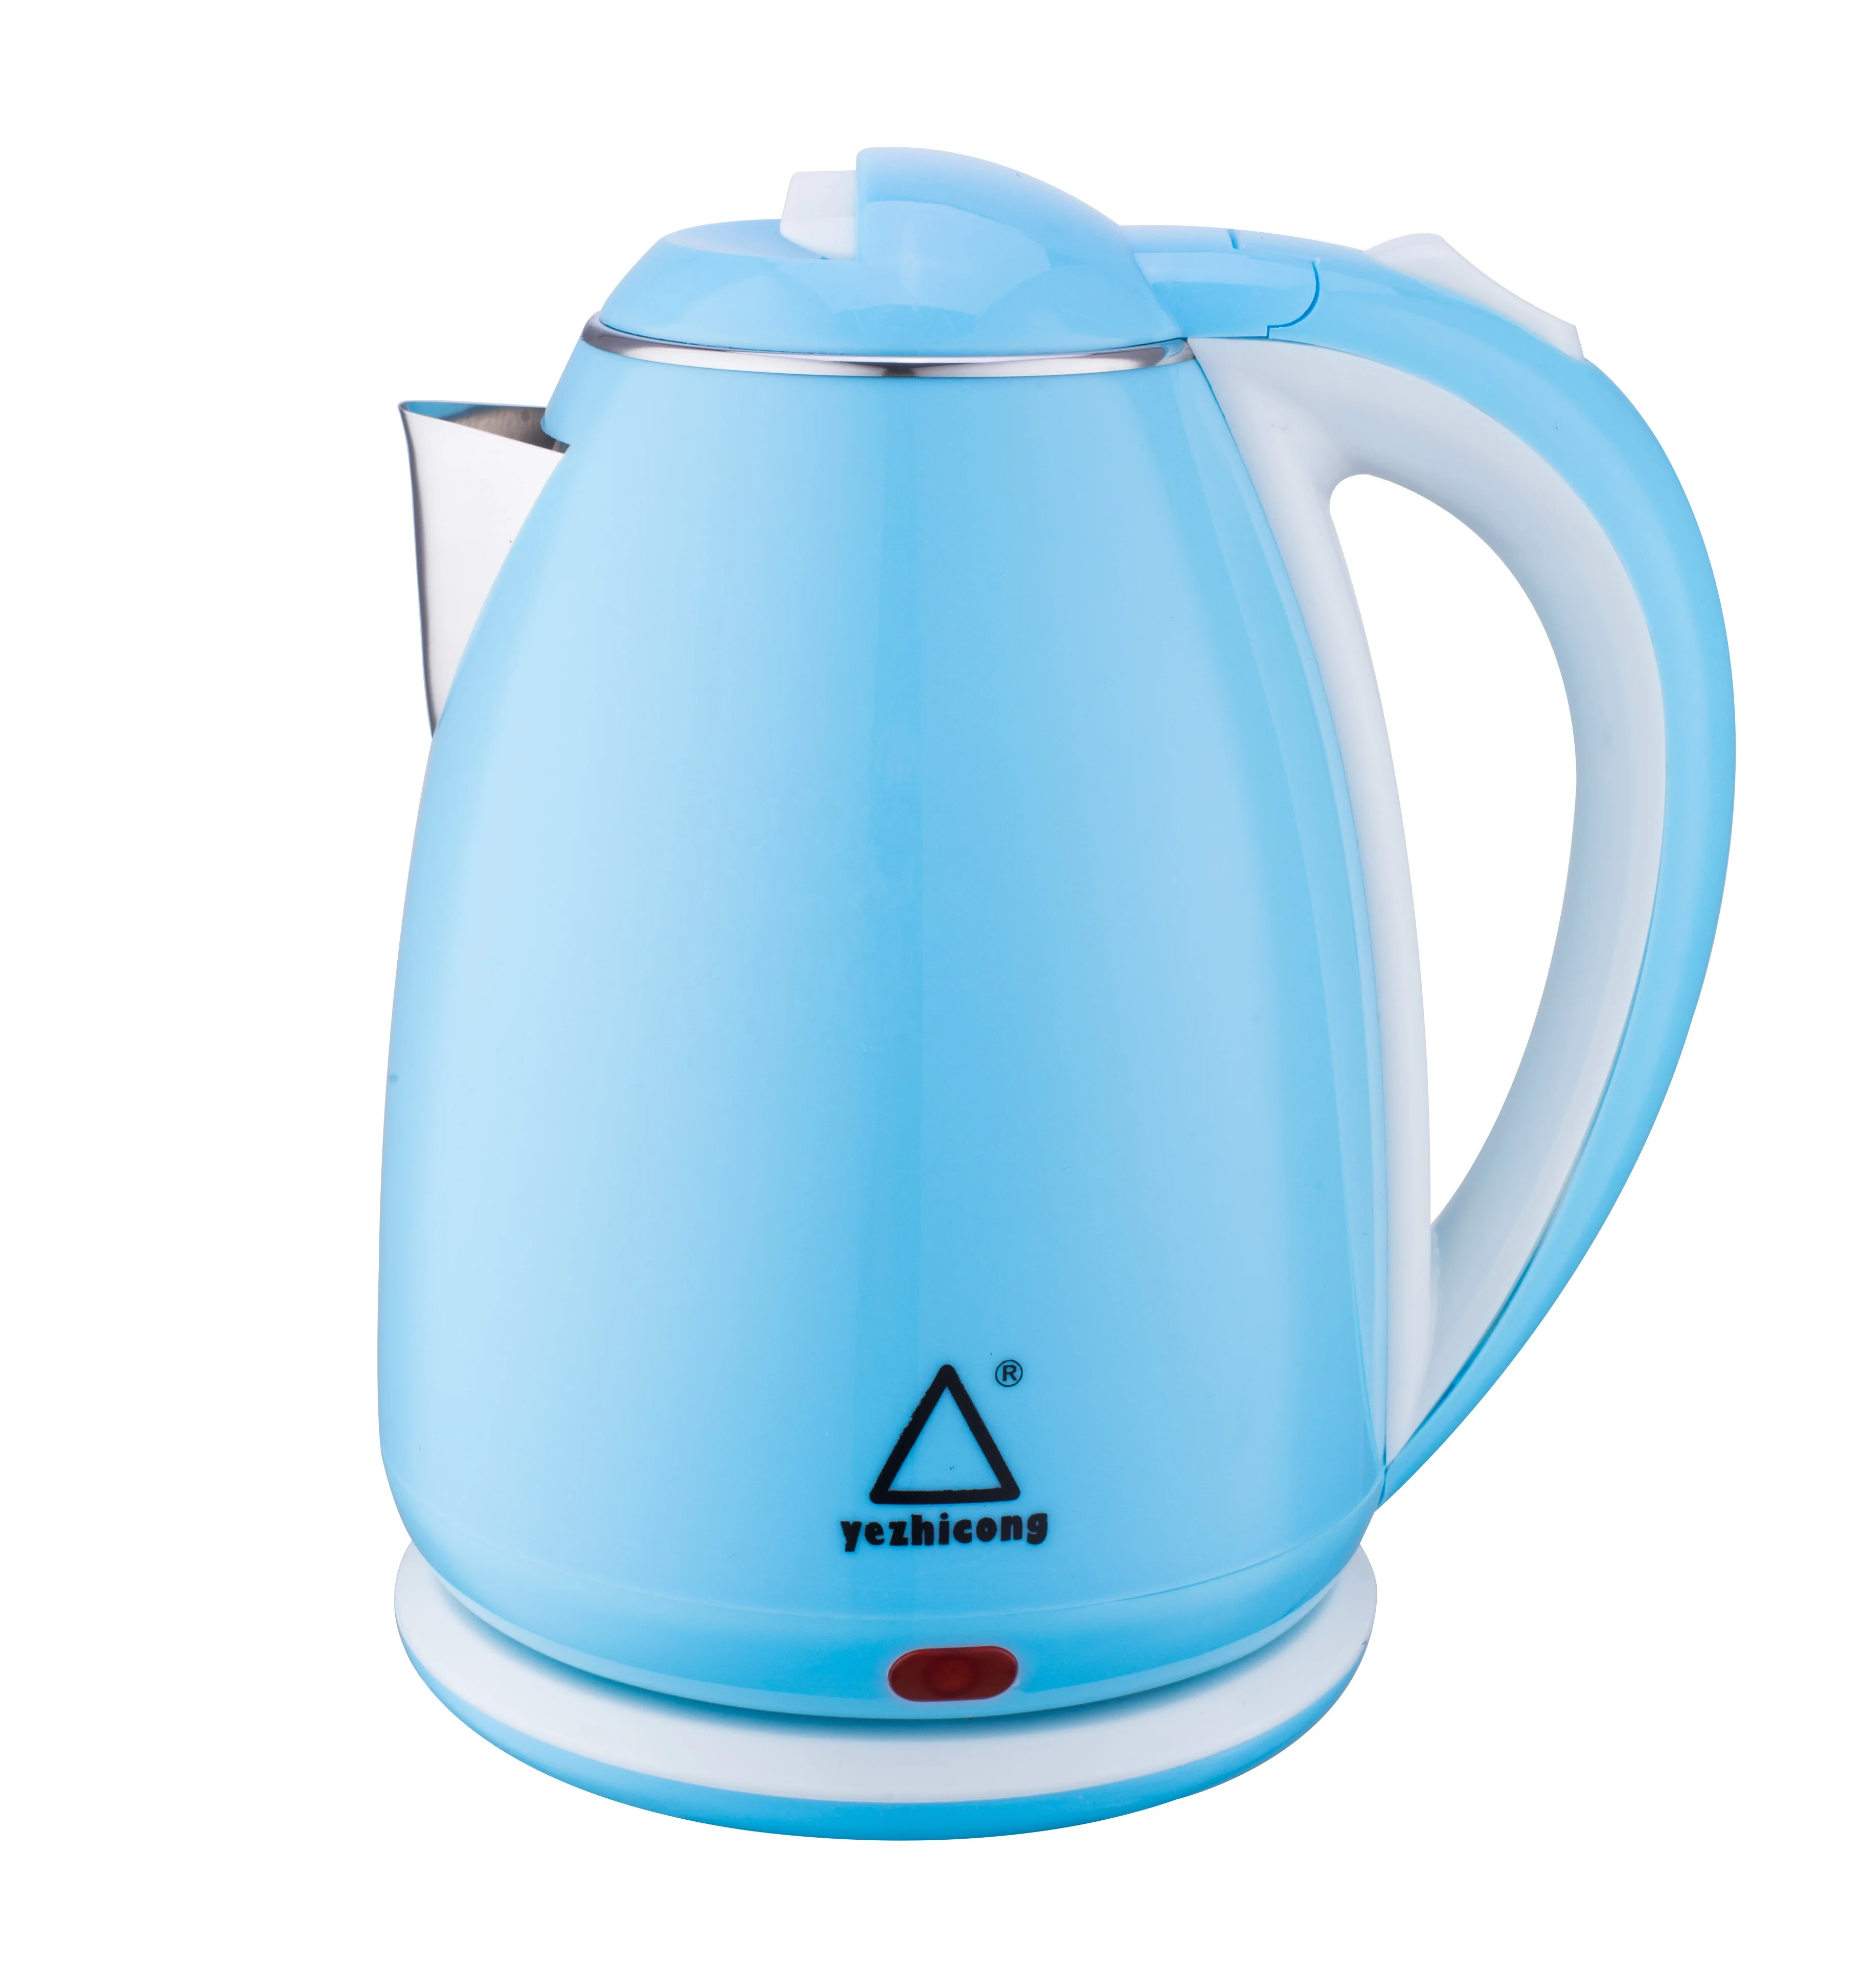 Deluxe PP jacketed scald-resistant electric kettle